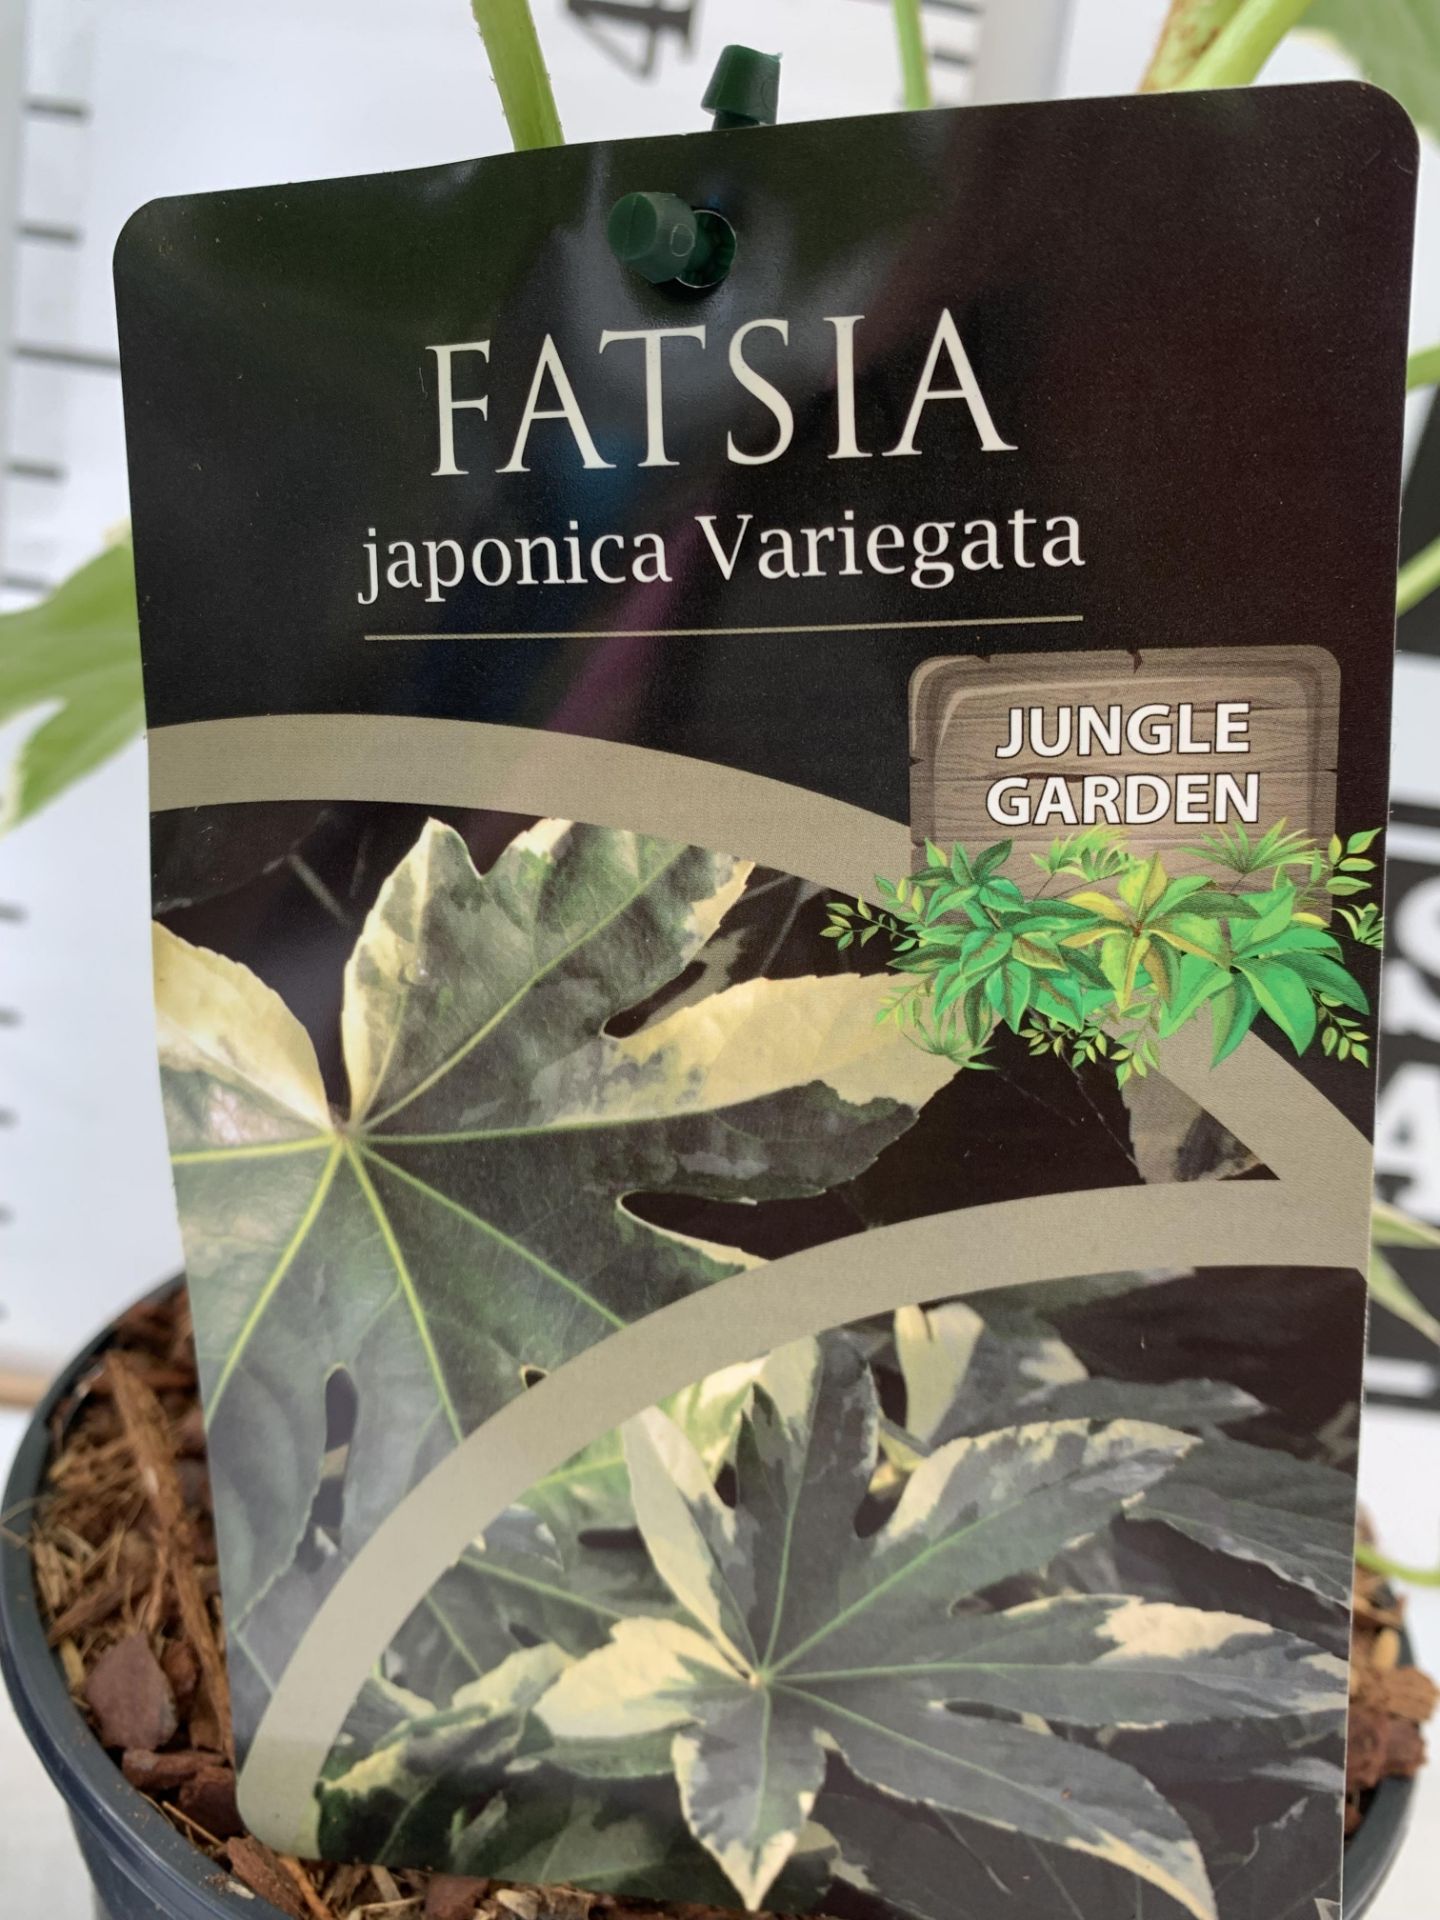 TWO FATSIA JUNGLE GARDEN JAPONICA VARIEGATA IN 2 LTR POTS 50CM TALL PLUS VAT TO BE SOLD FOR THE TWO - Image 7 of 10